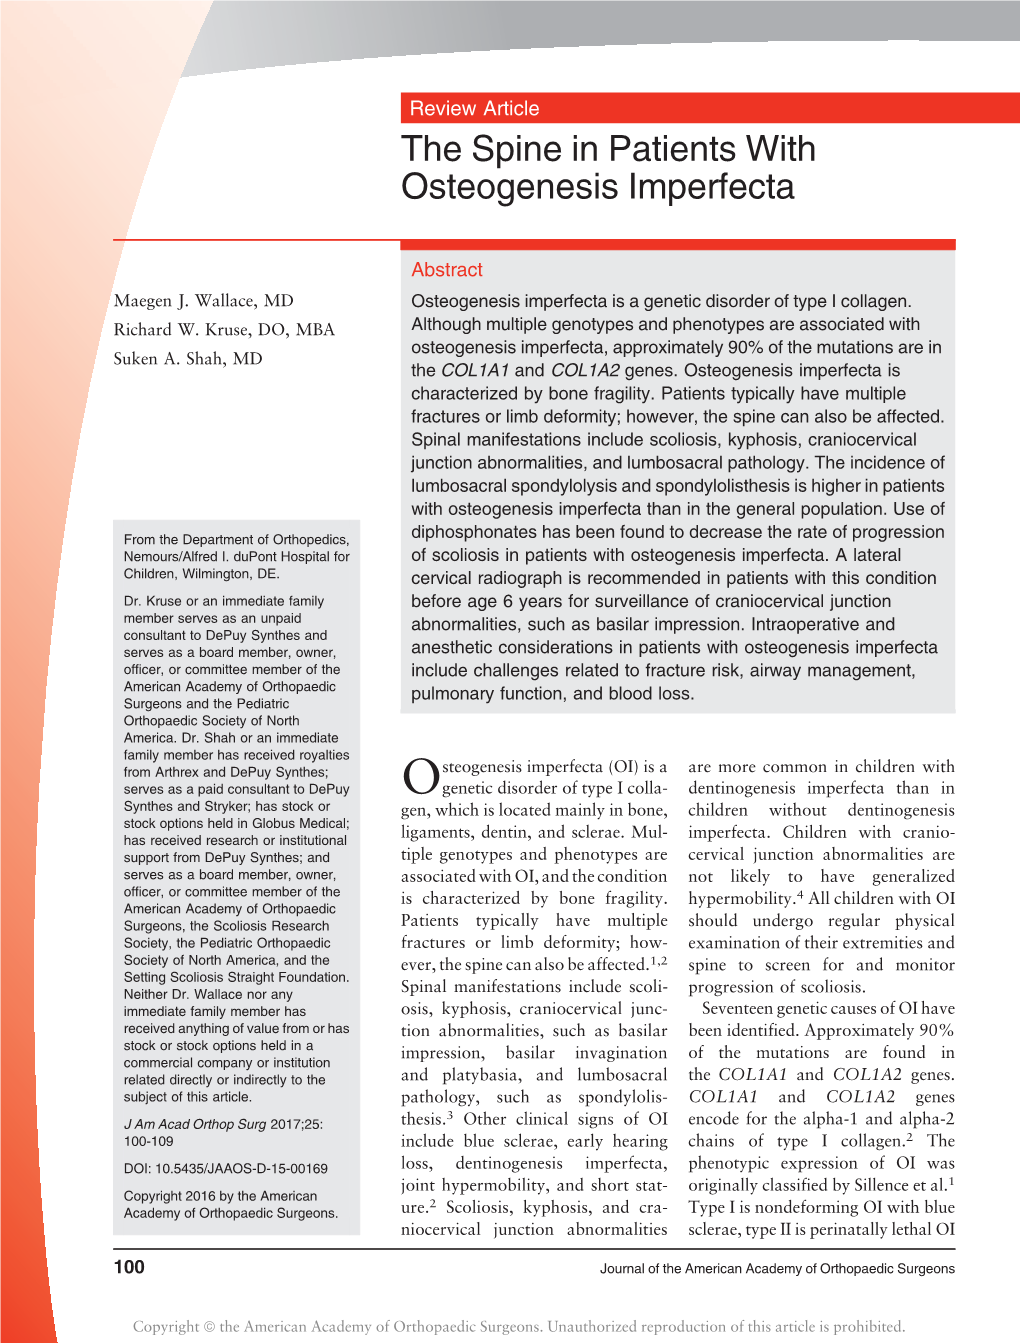 The Spine in Patients with OI Article